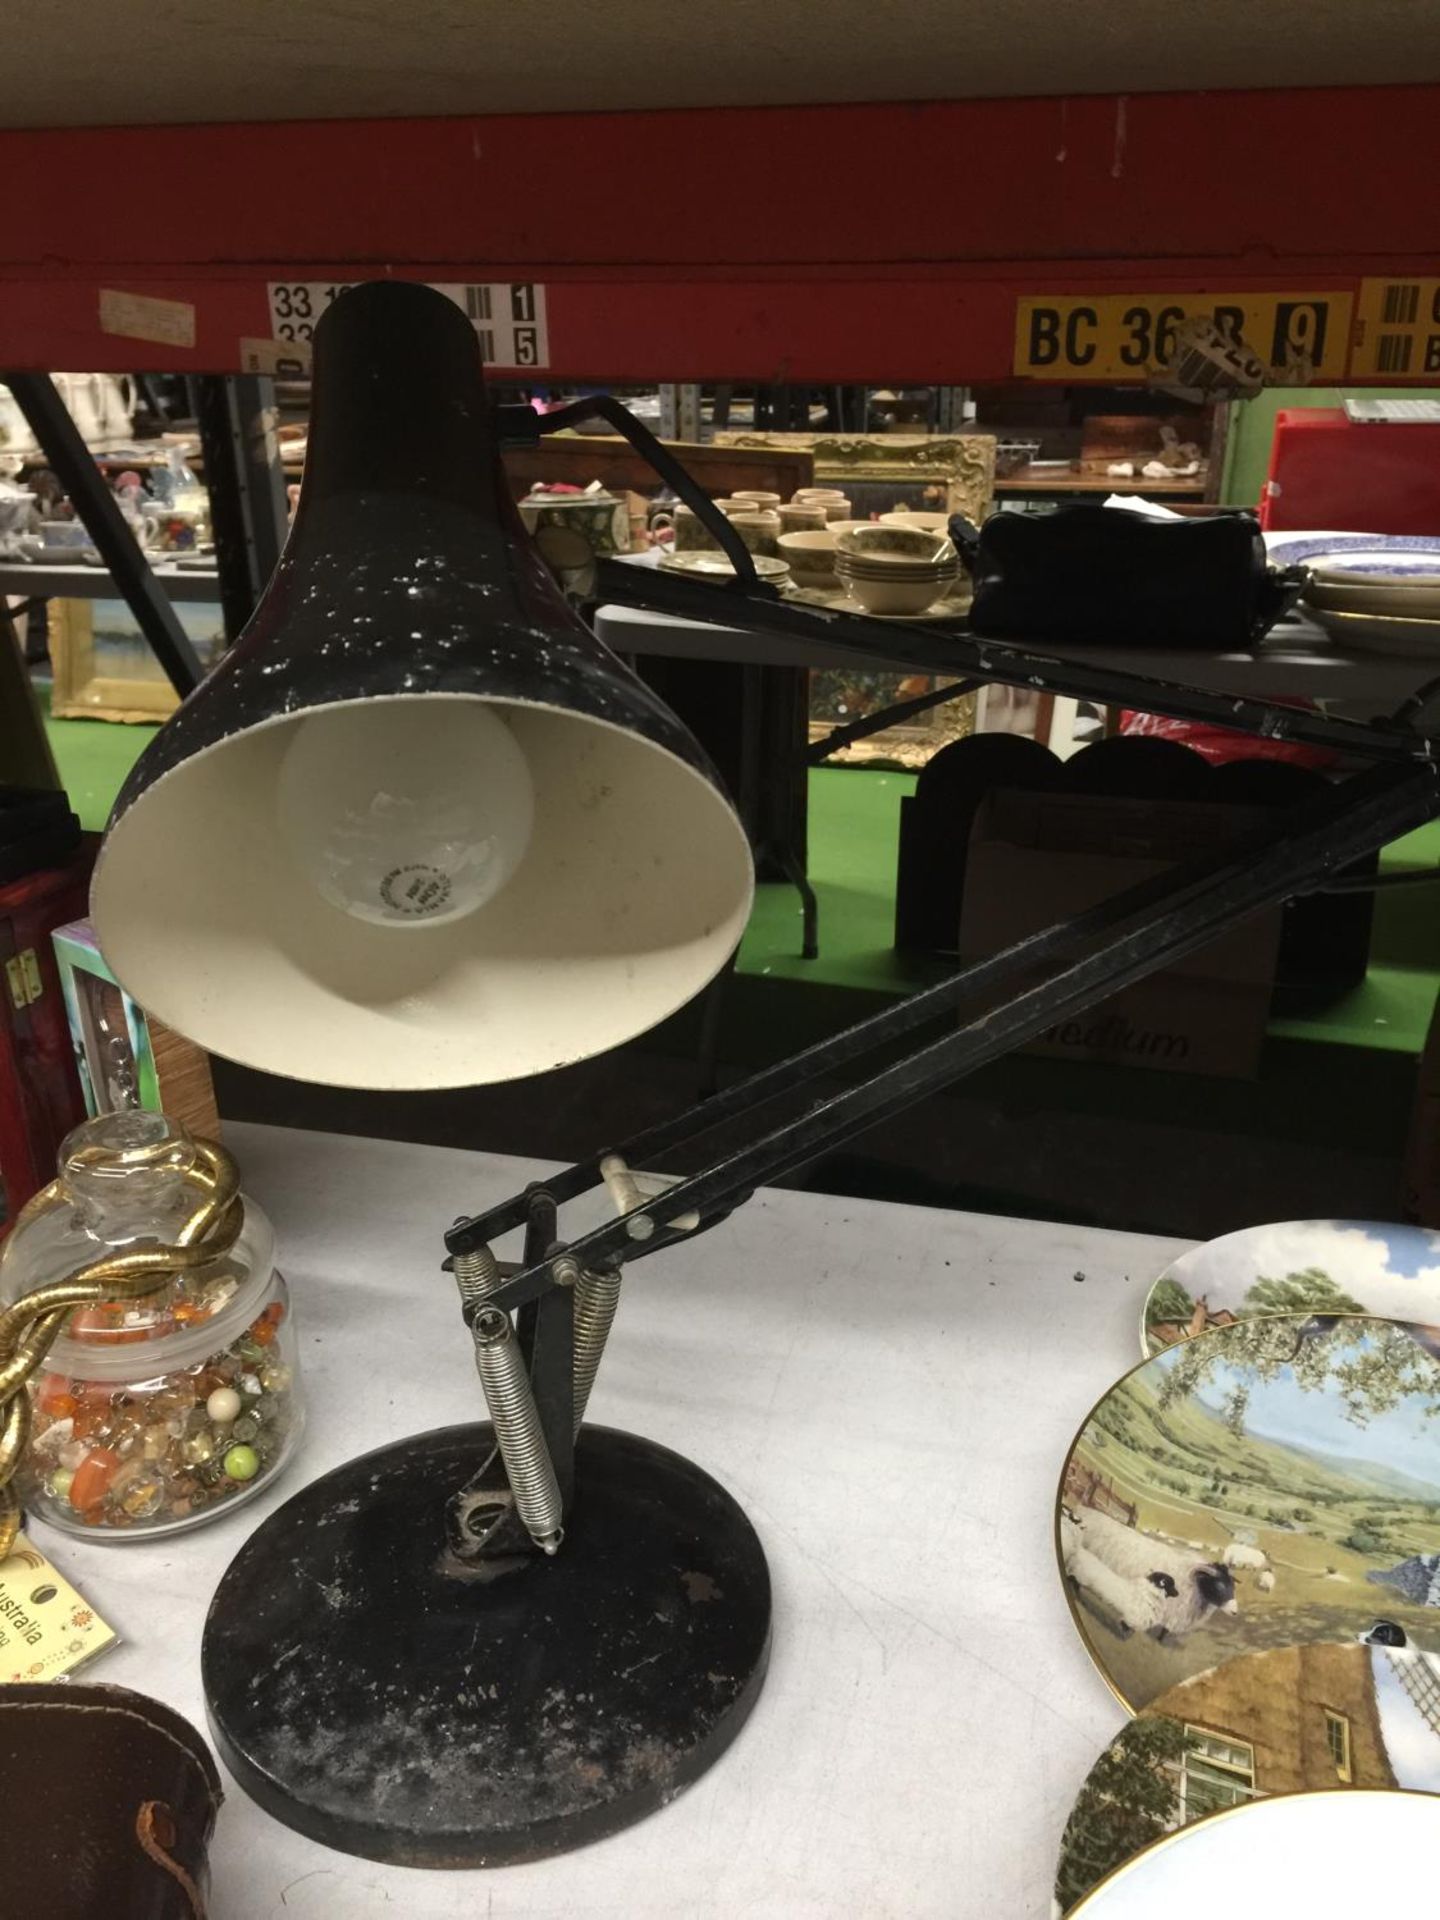 A VINTAGE BLACK ANGLEPOISE LAMP - Image 2 of 3